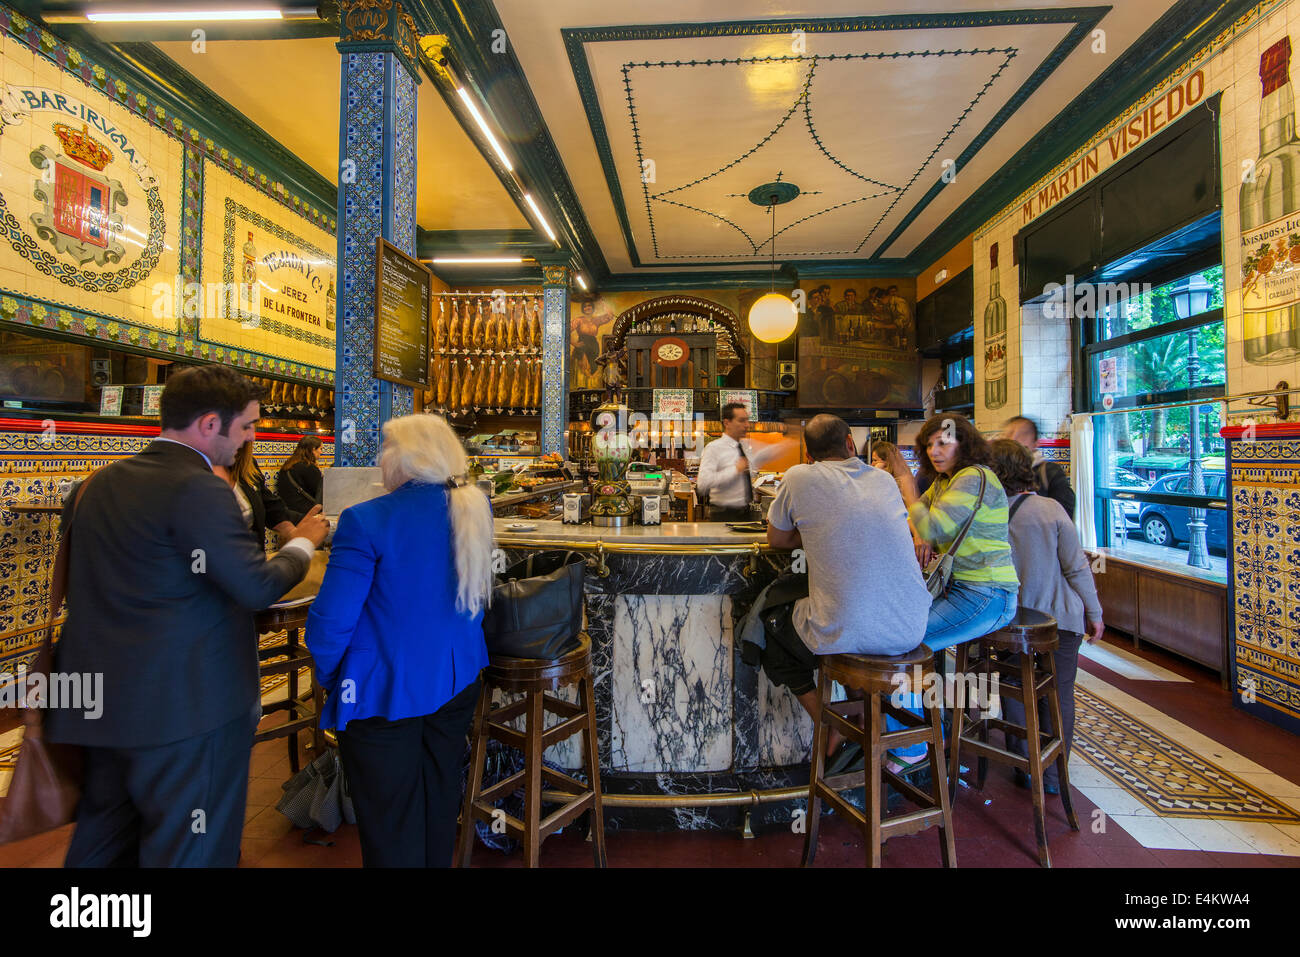 Interior of the historic Cafe Iruna established in 1903, Bilbao, Basque Country, Spain Stock Photo